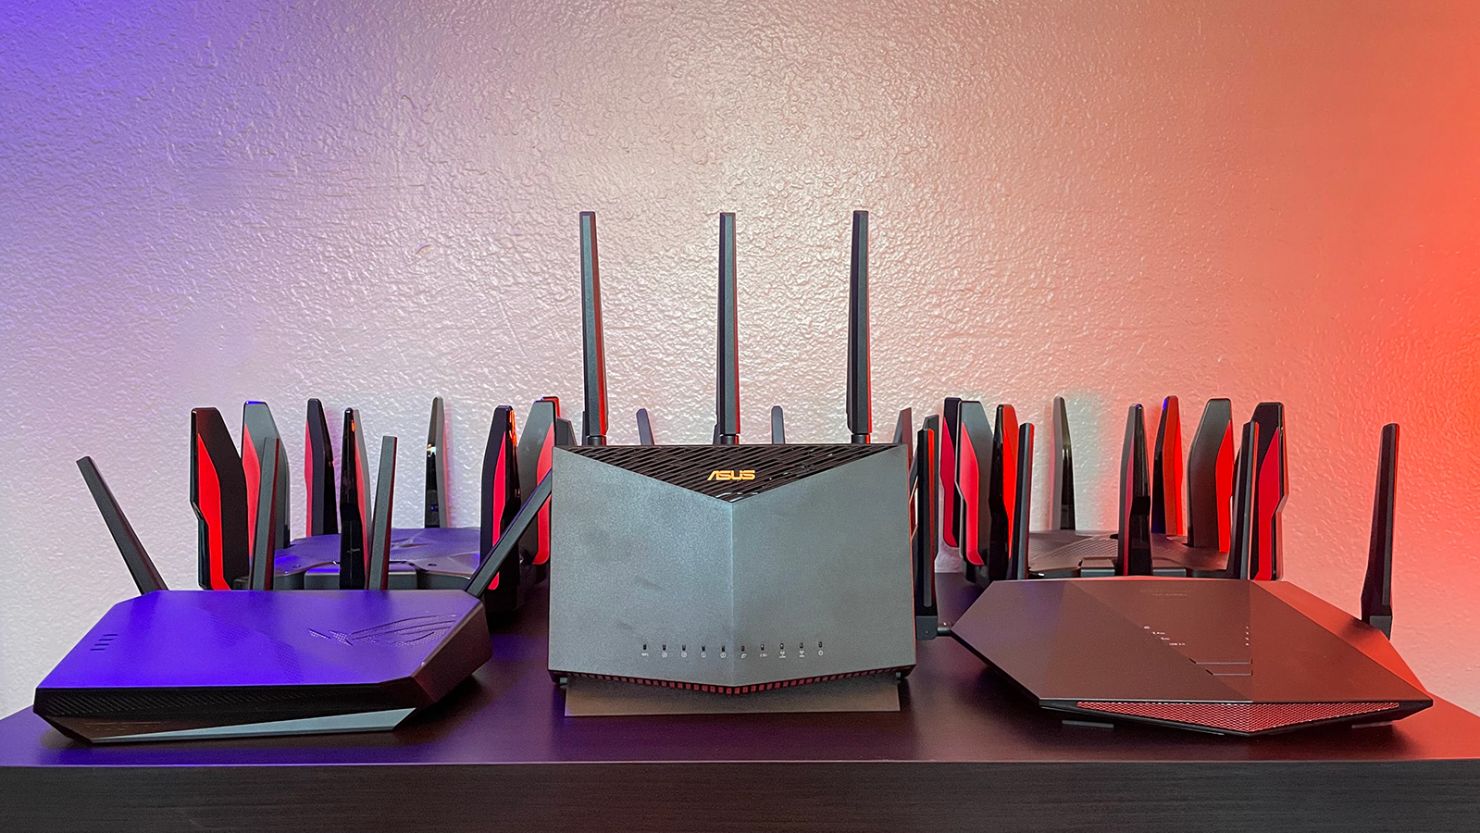 TUF Gaming AX3000 V2｜WiFi Routers｜ASUS United Kingdom